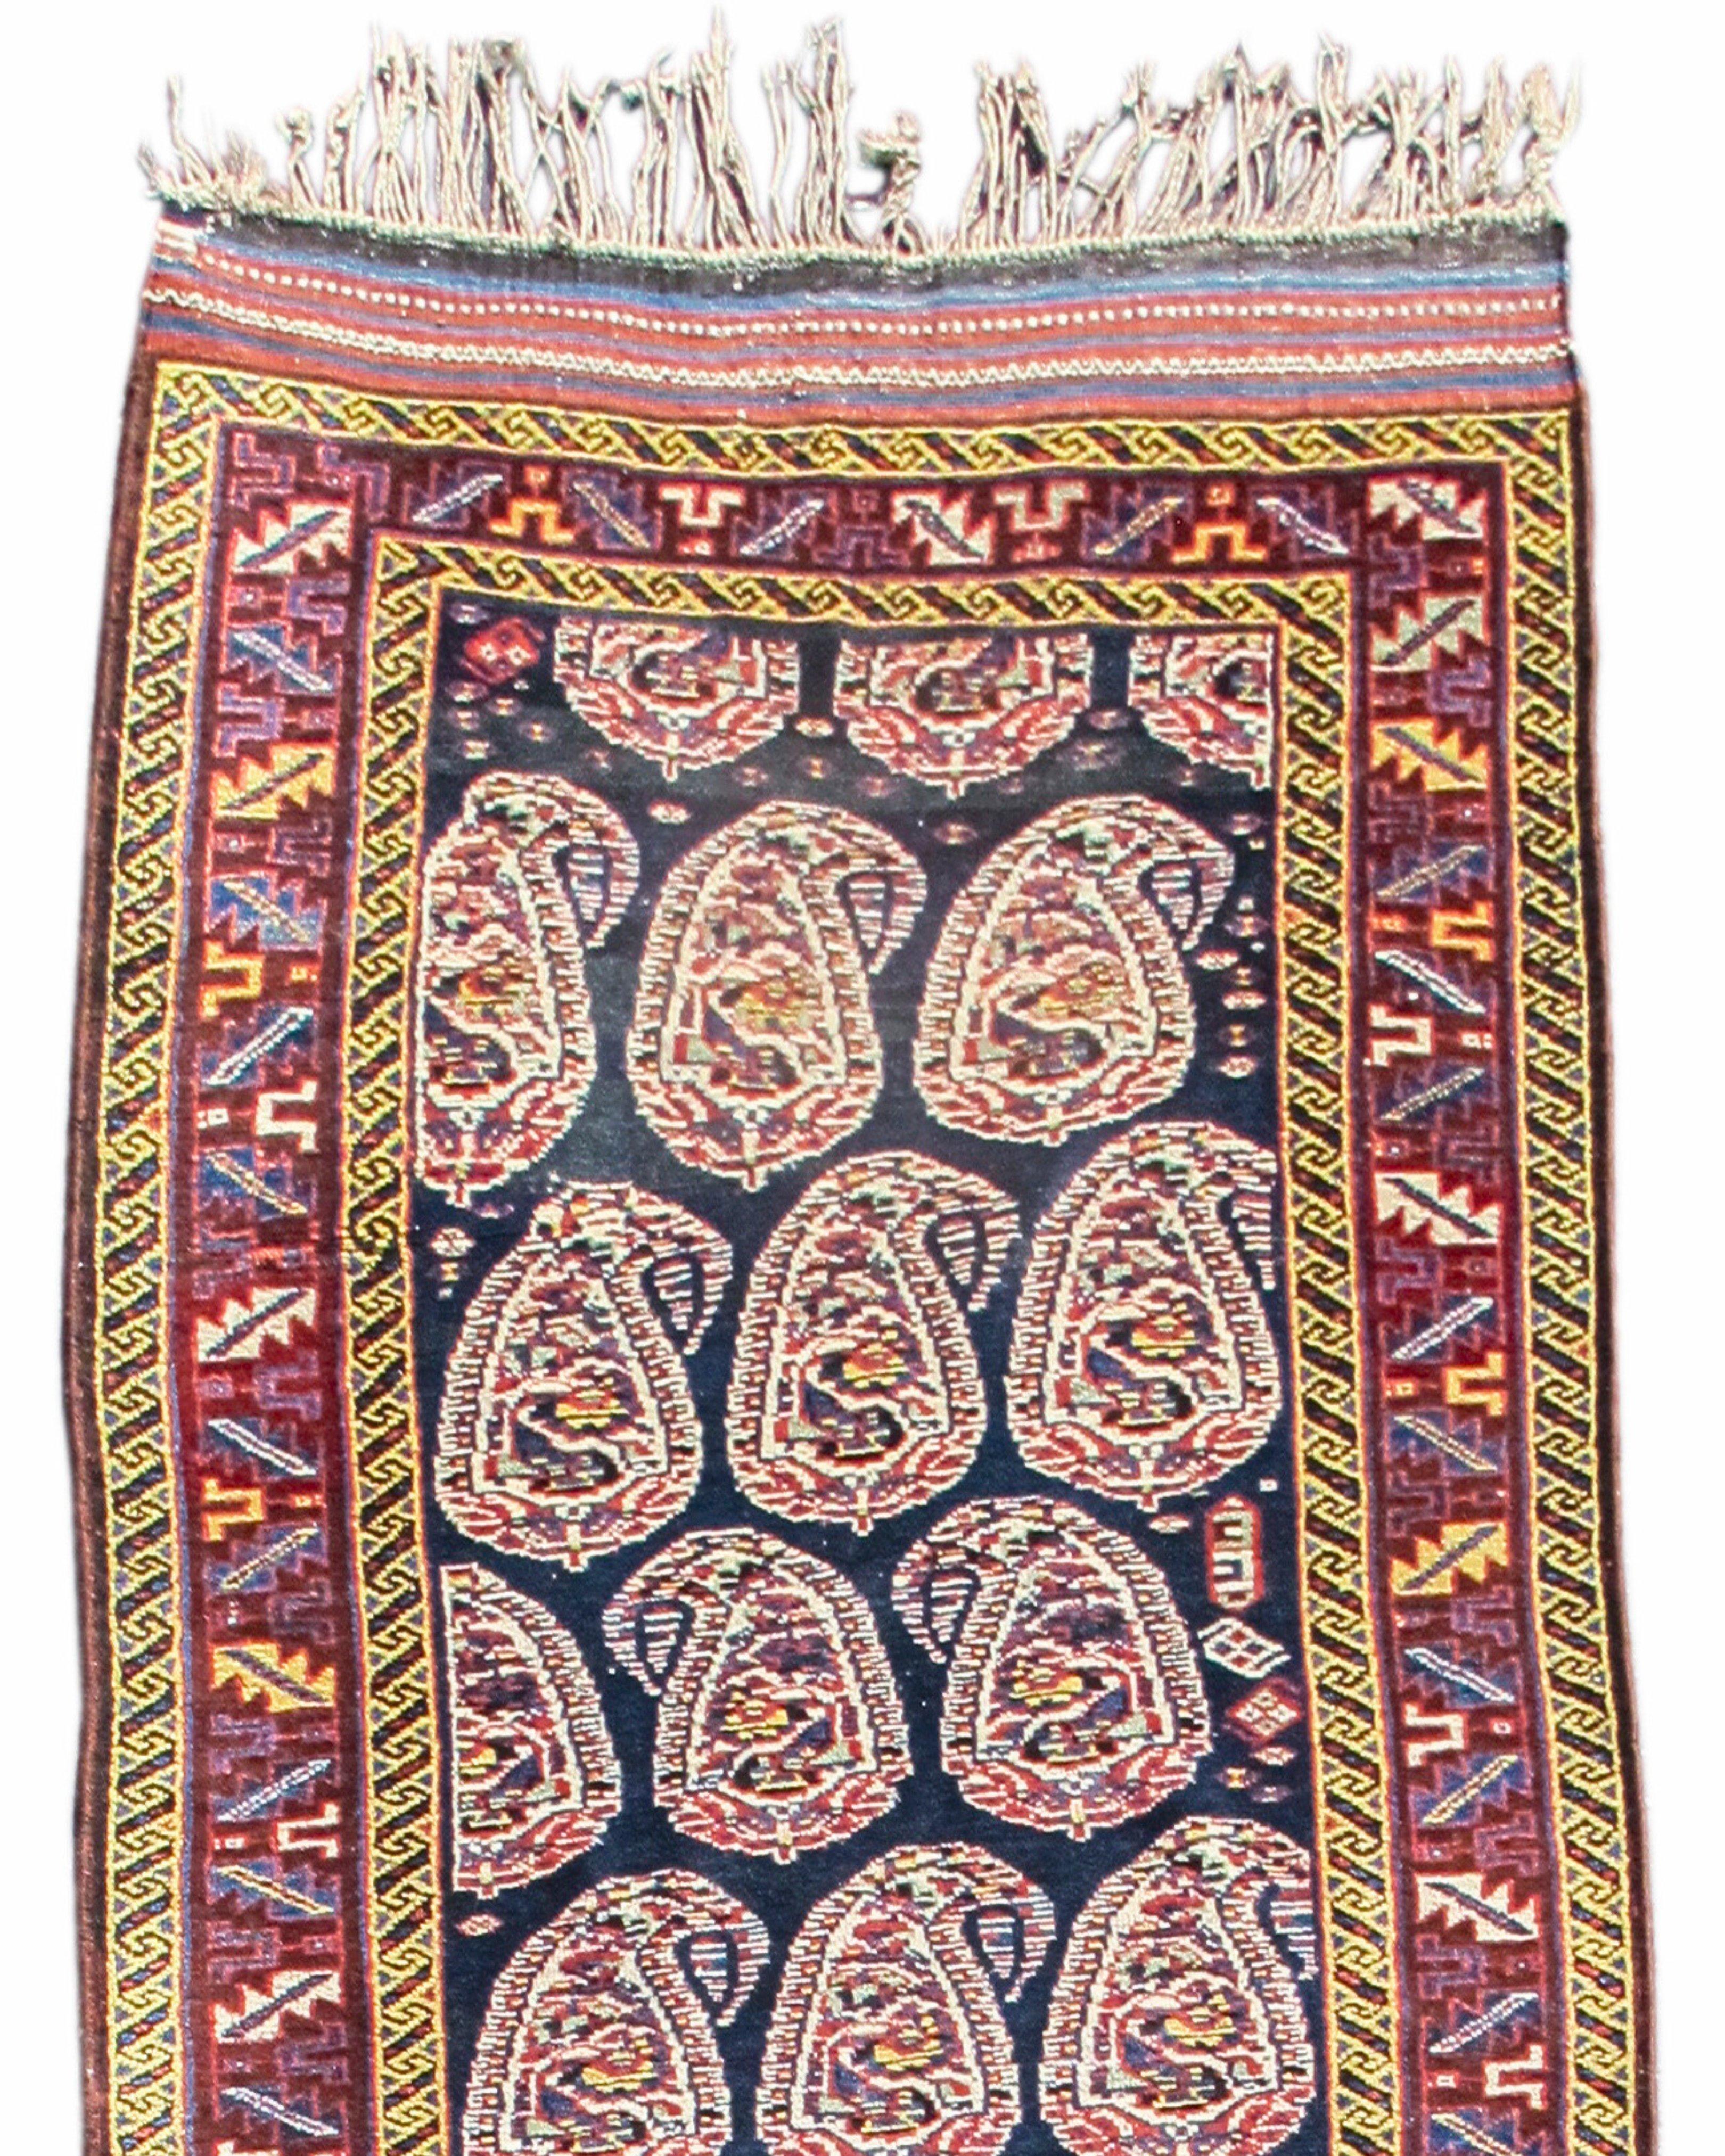 Antique Persian Luri Runner, c. 1900 In Excellent Condition For Sale In San Francisco, CA